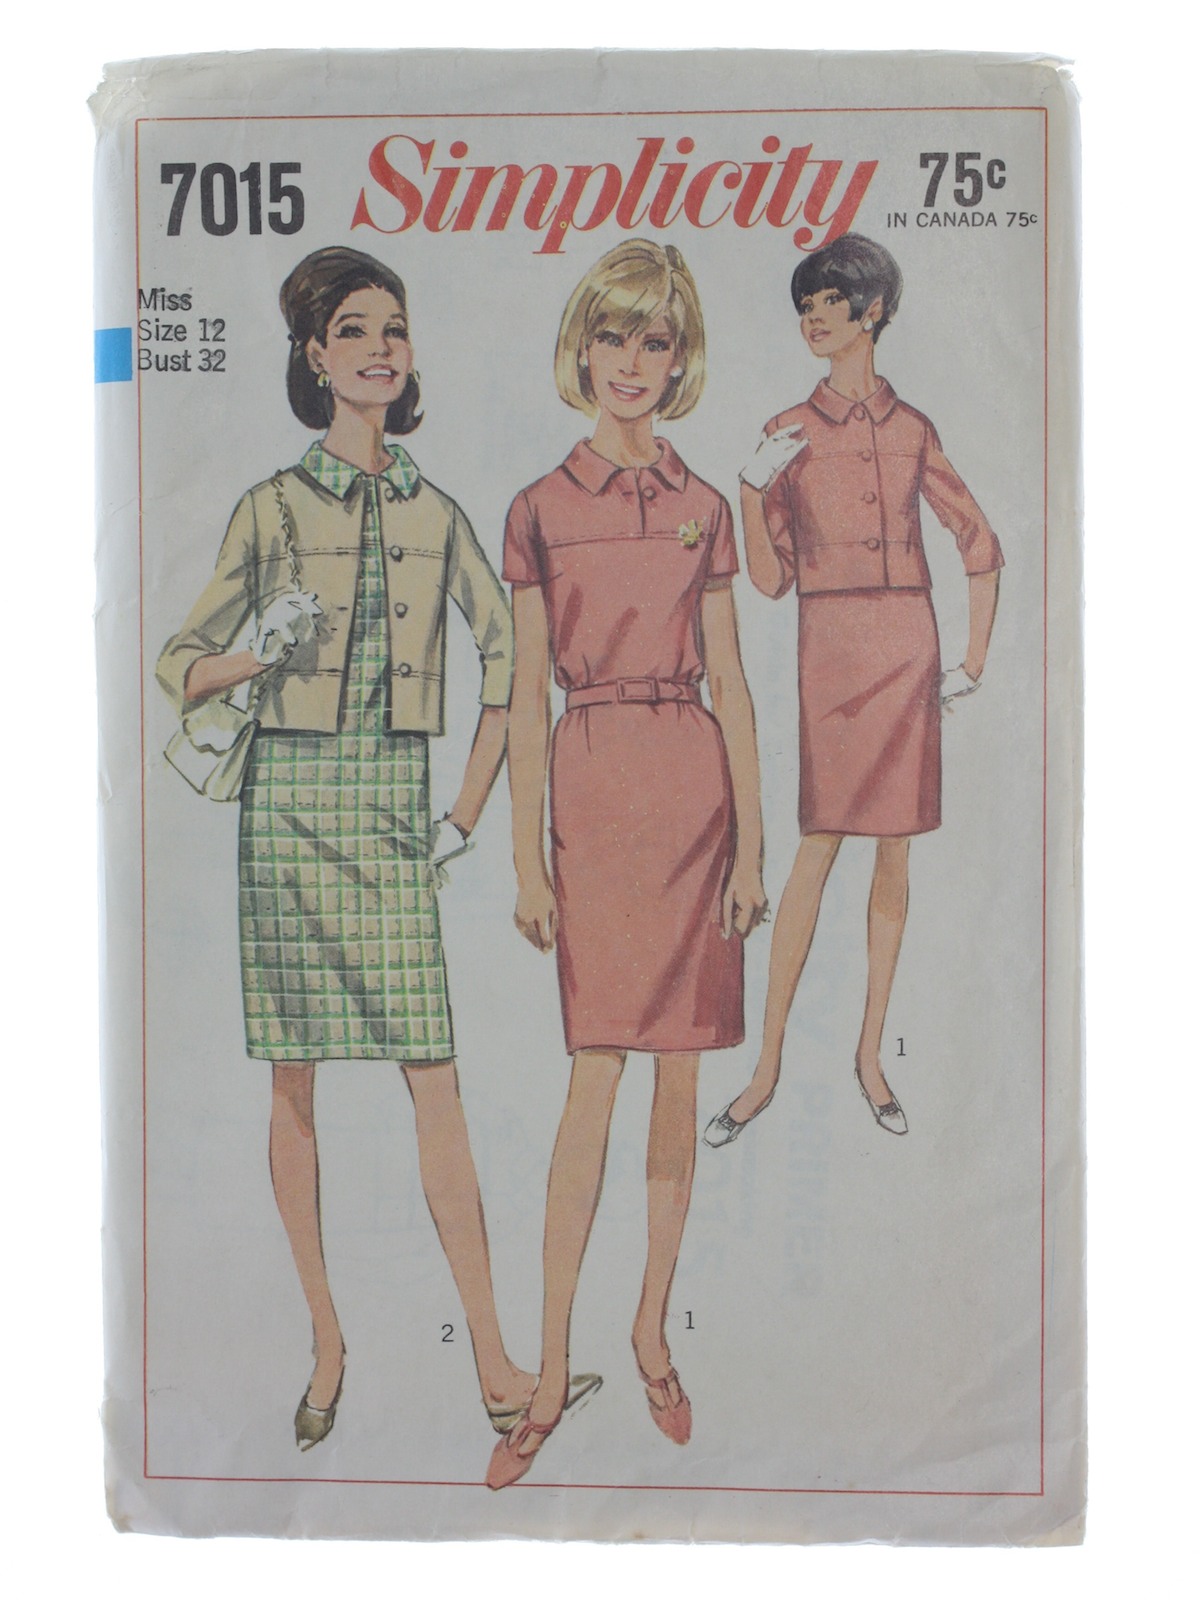 Simplicity Pattern No 7015 60 S Vintage Sewing Pattern 1967 Simplicity Pattern No 7015 Womens One Piece Dress And Jacket The Slim Dress Has Yoke With Front Button Closing Collar Back Zipper Short